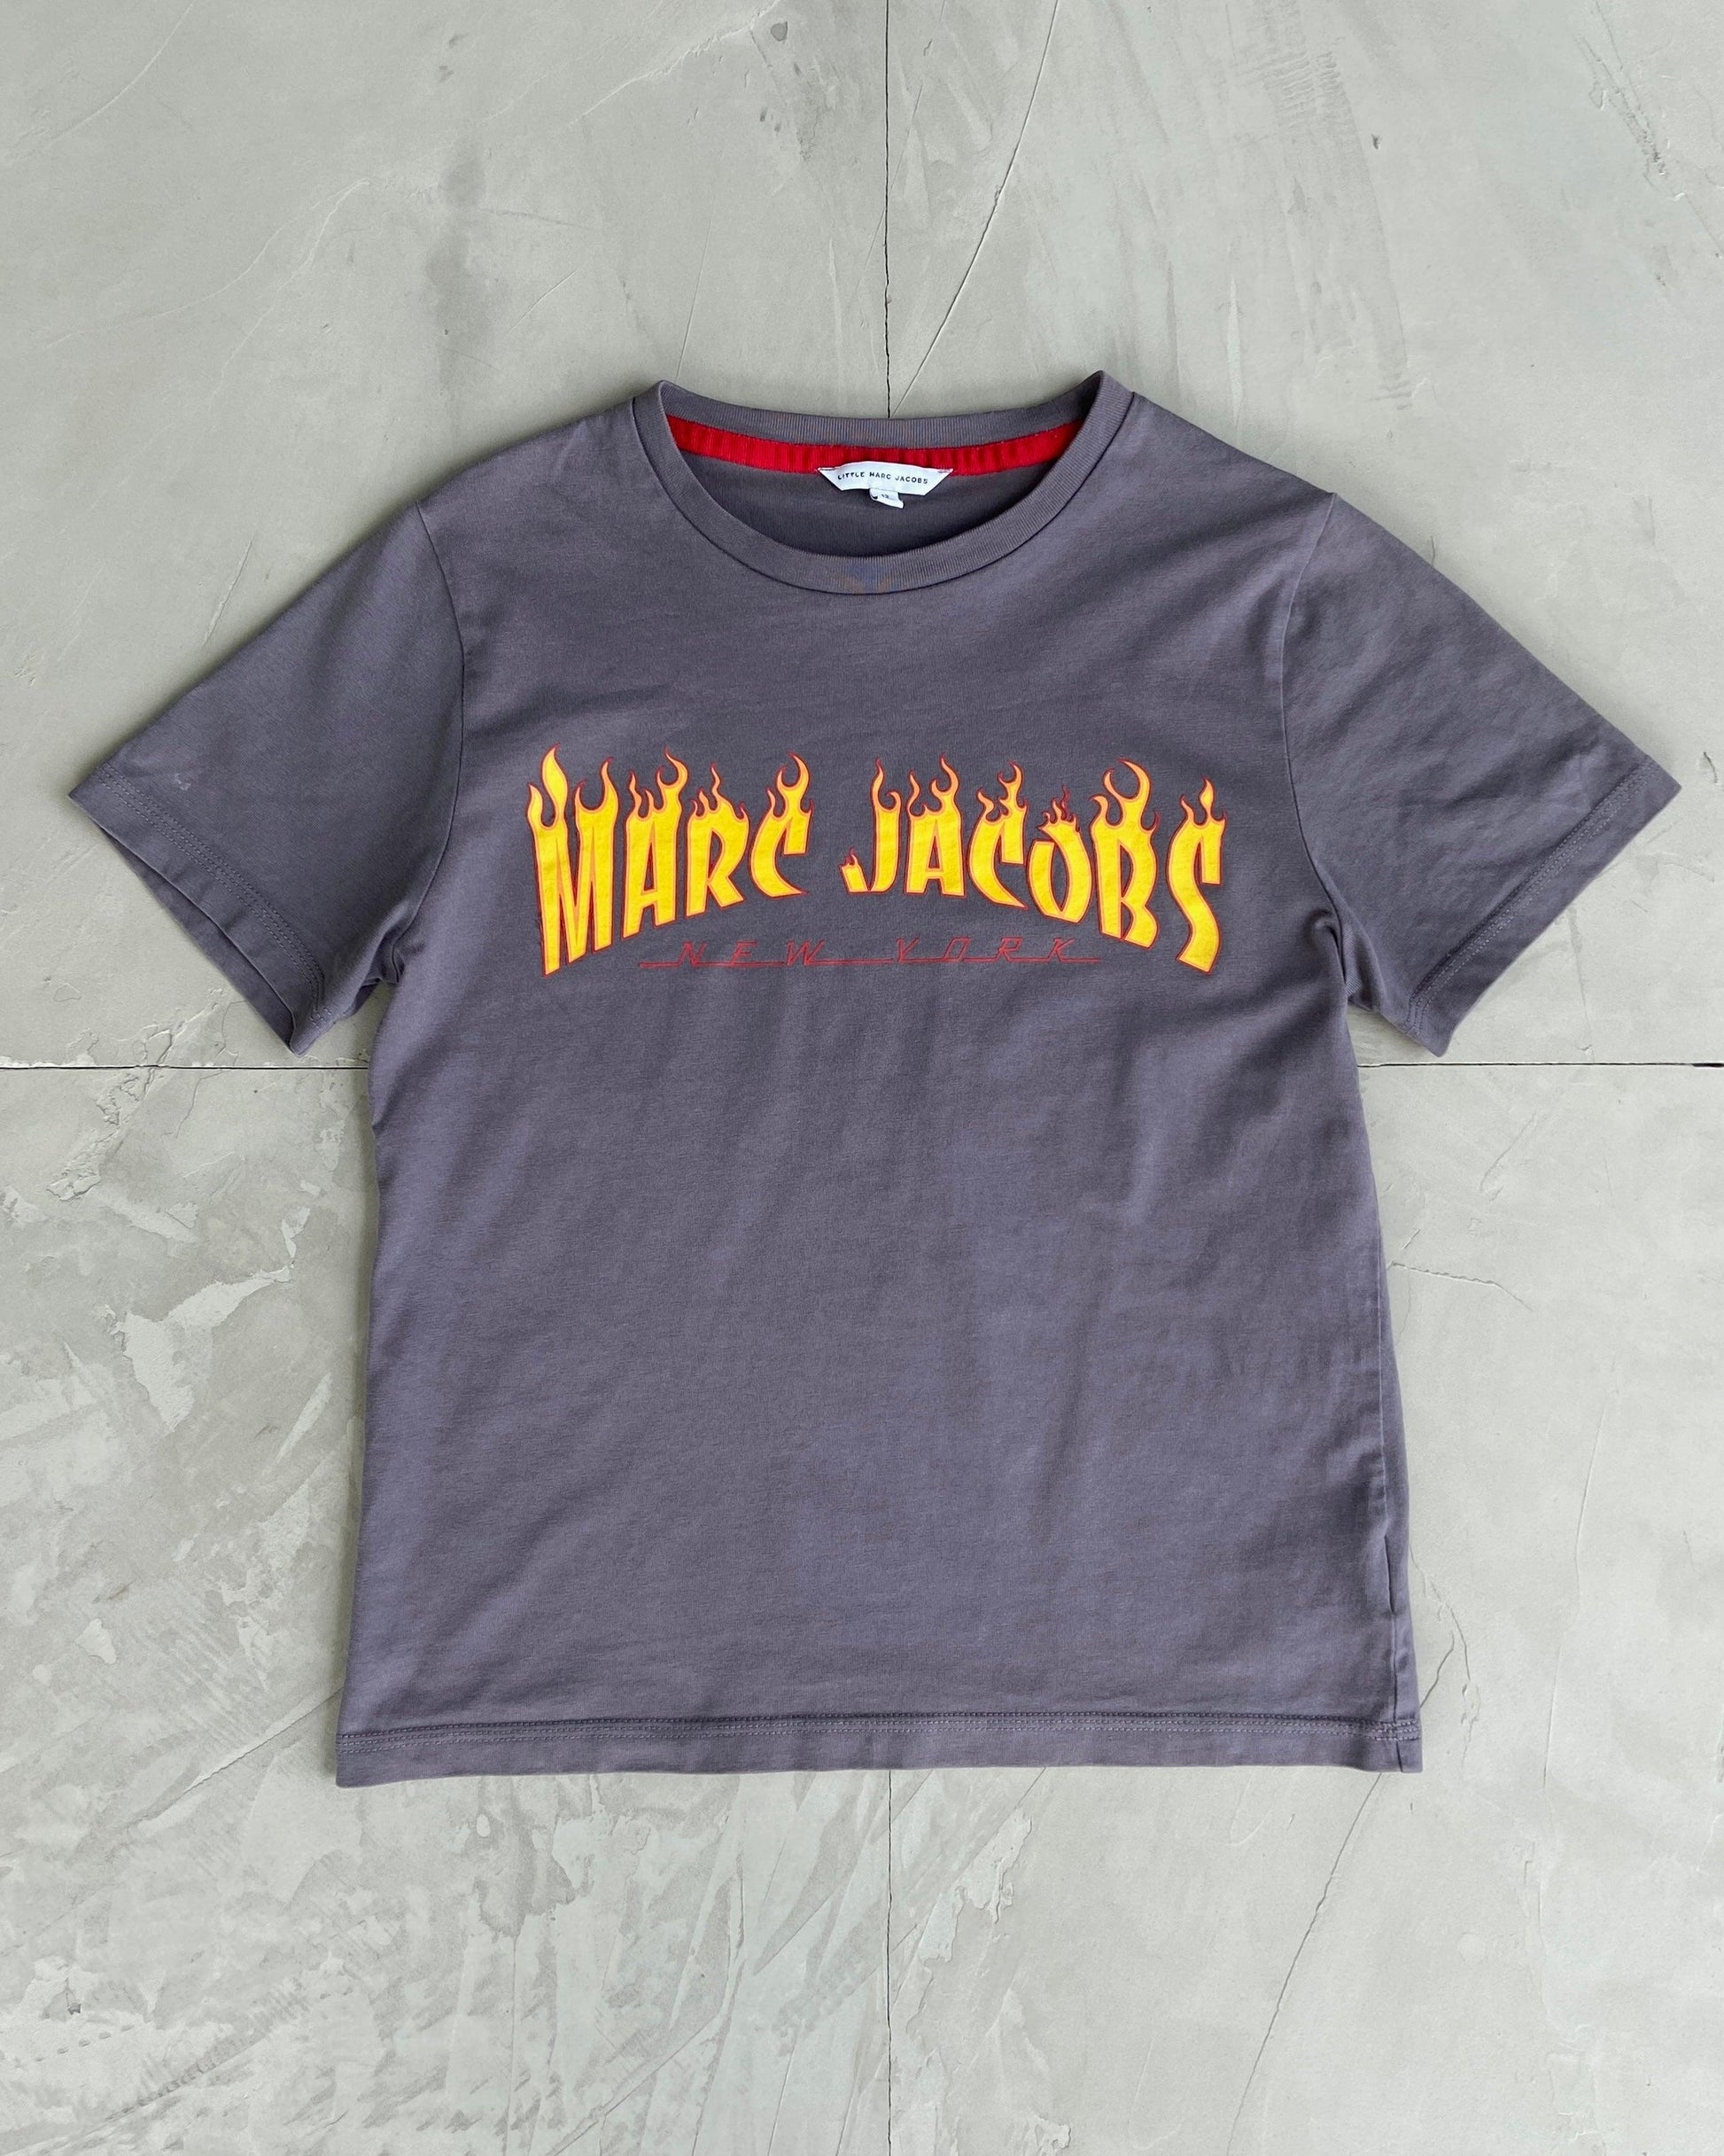 MARC JACOBS NYC 2000'S BABY TEE - S - Known Source